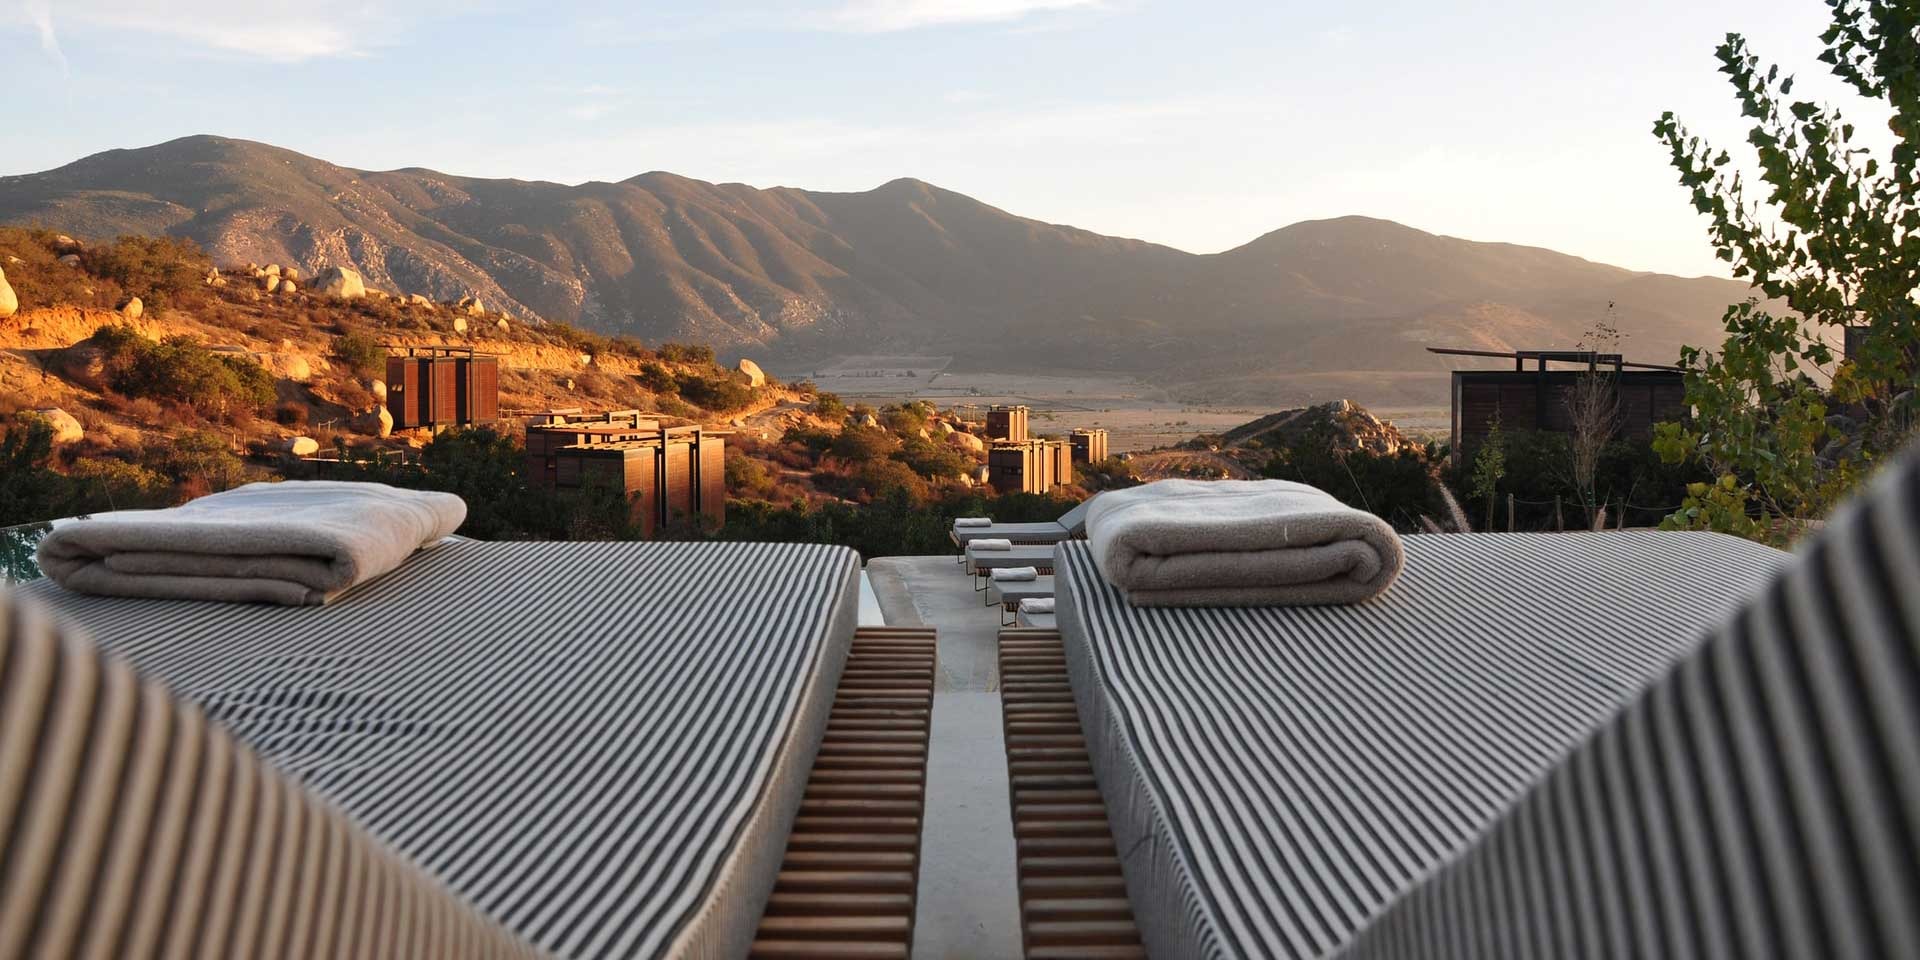 Book hotel rooms in Morocco